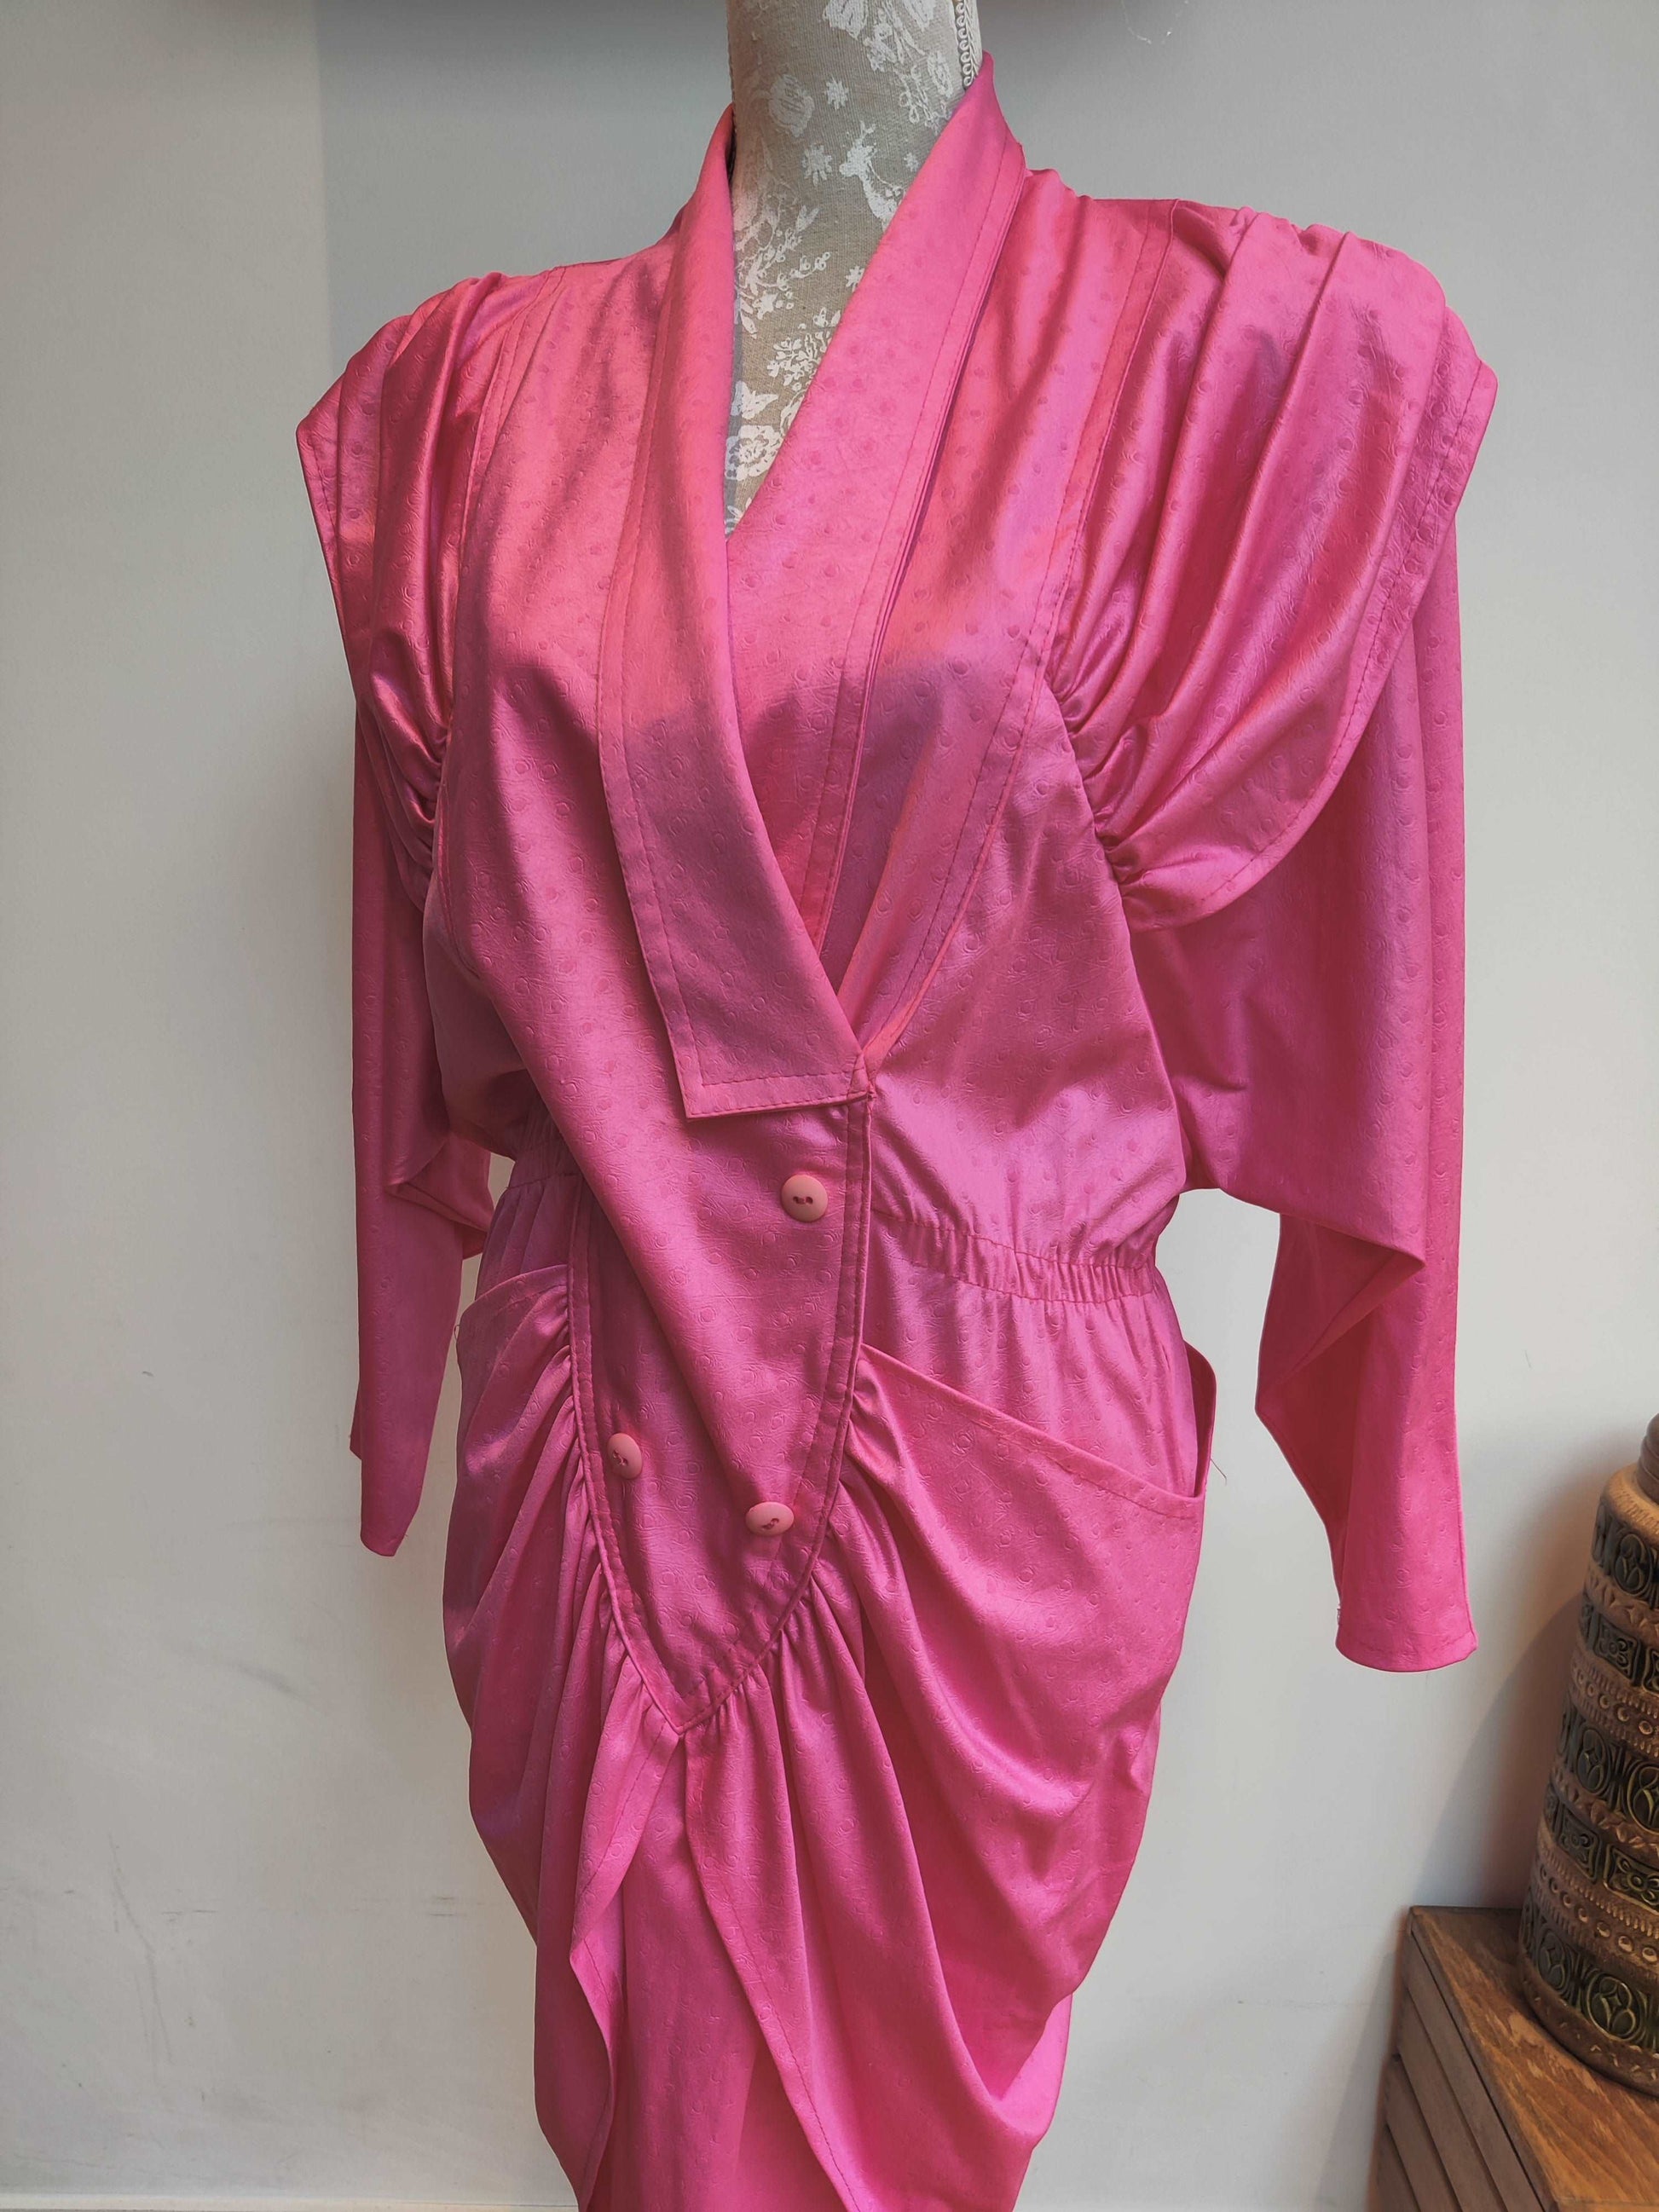 Awesome pink 80s dress size 12.